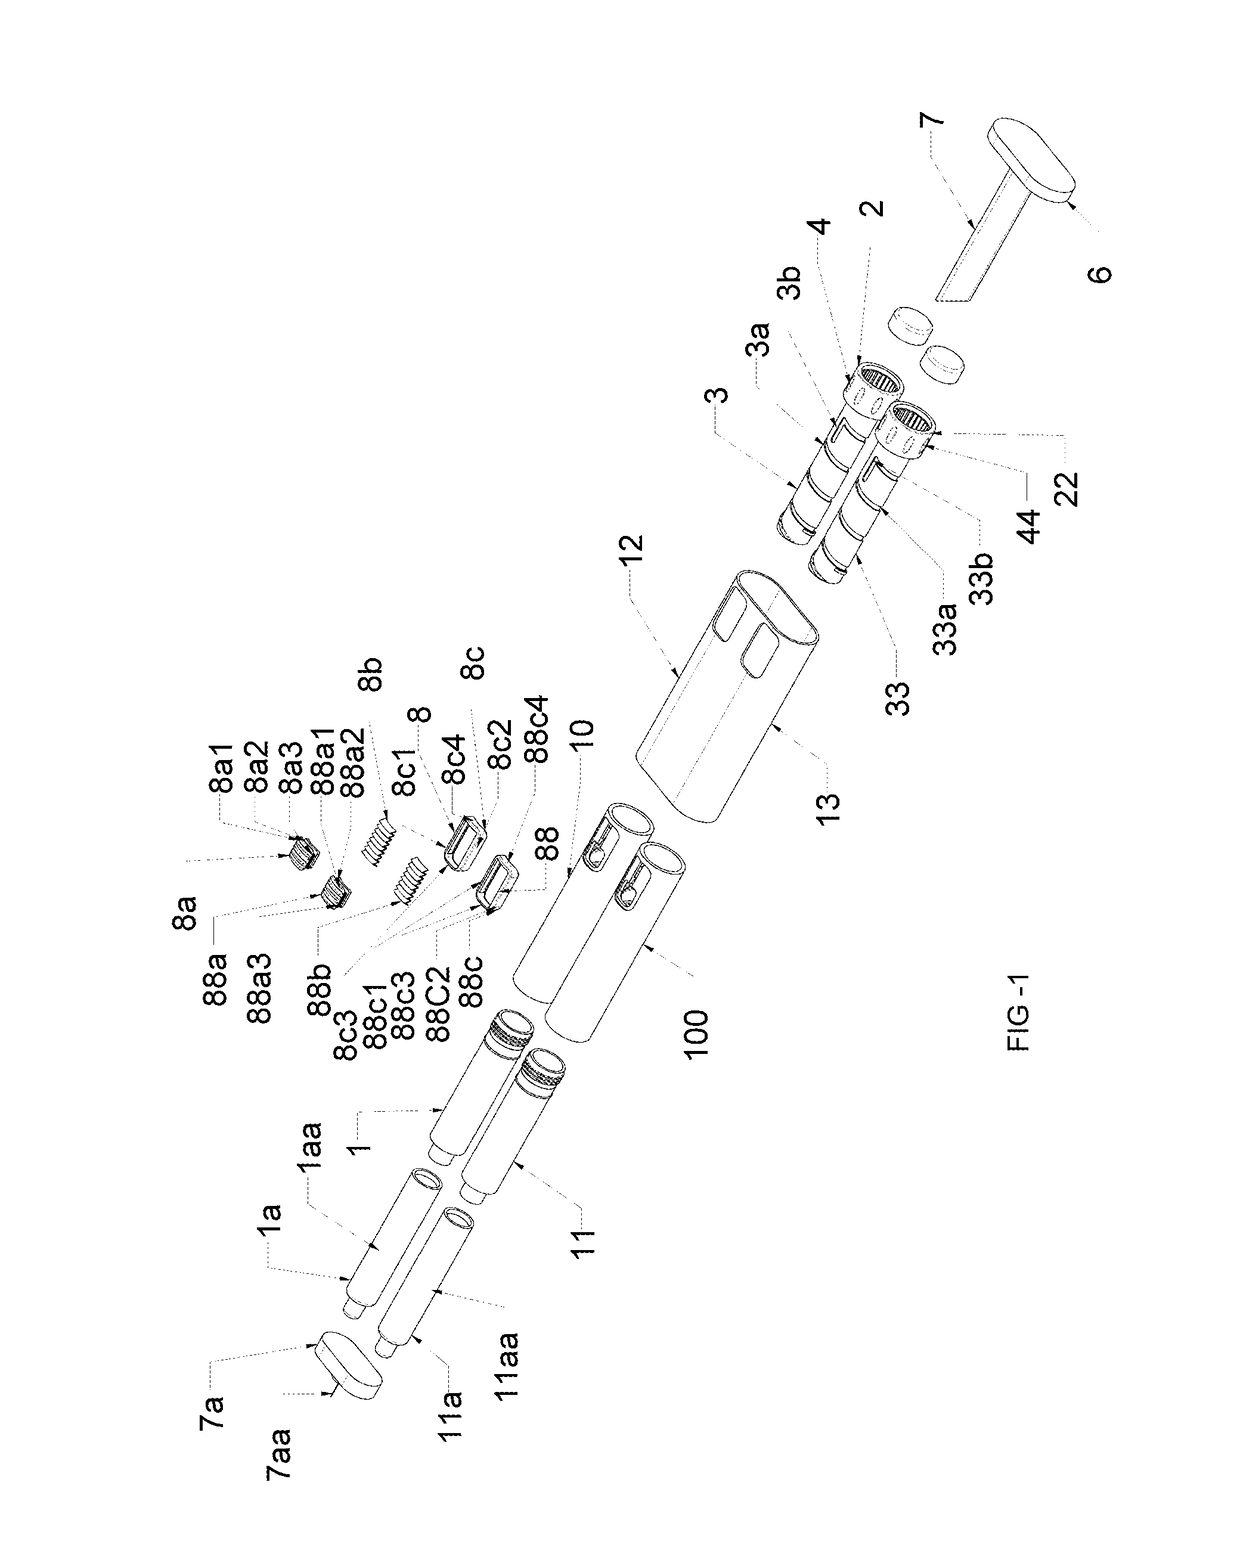 A drug delivery device for delivery of two or more independently user selectable multiple doses of medicaments with user operable variable dose locking mechanisms